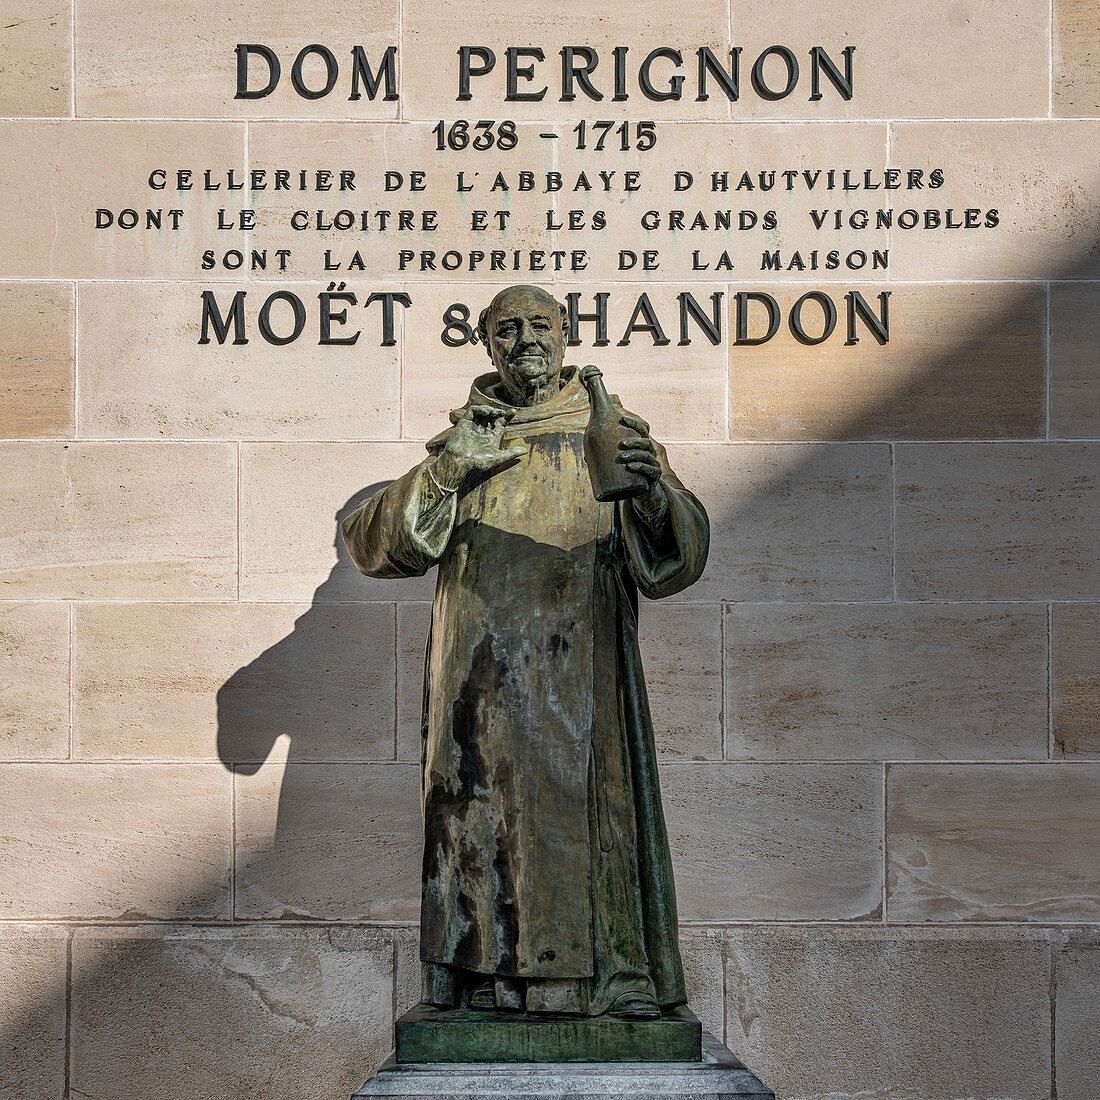 Statue of Dom Perignon, Moet et Chandon, LVMH, Louis Vuitton Moet Hennessy Group, Epernay, Champagne, France